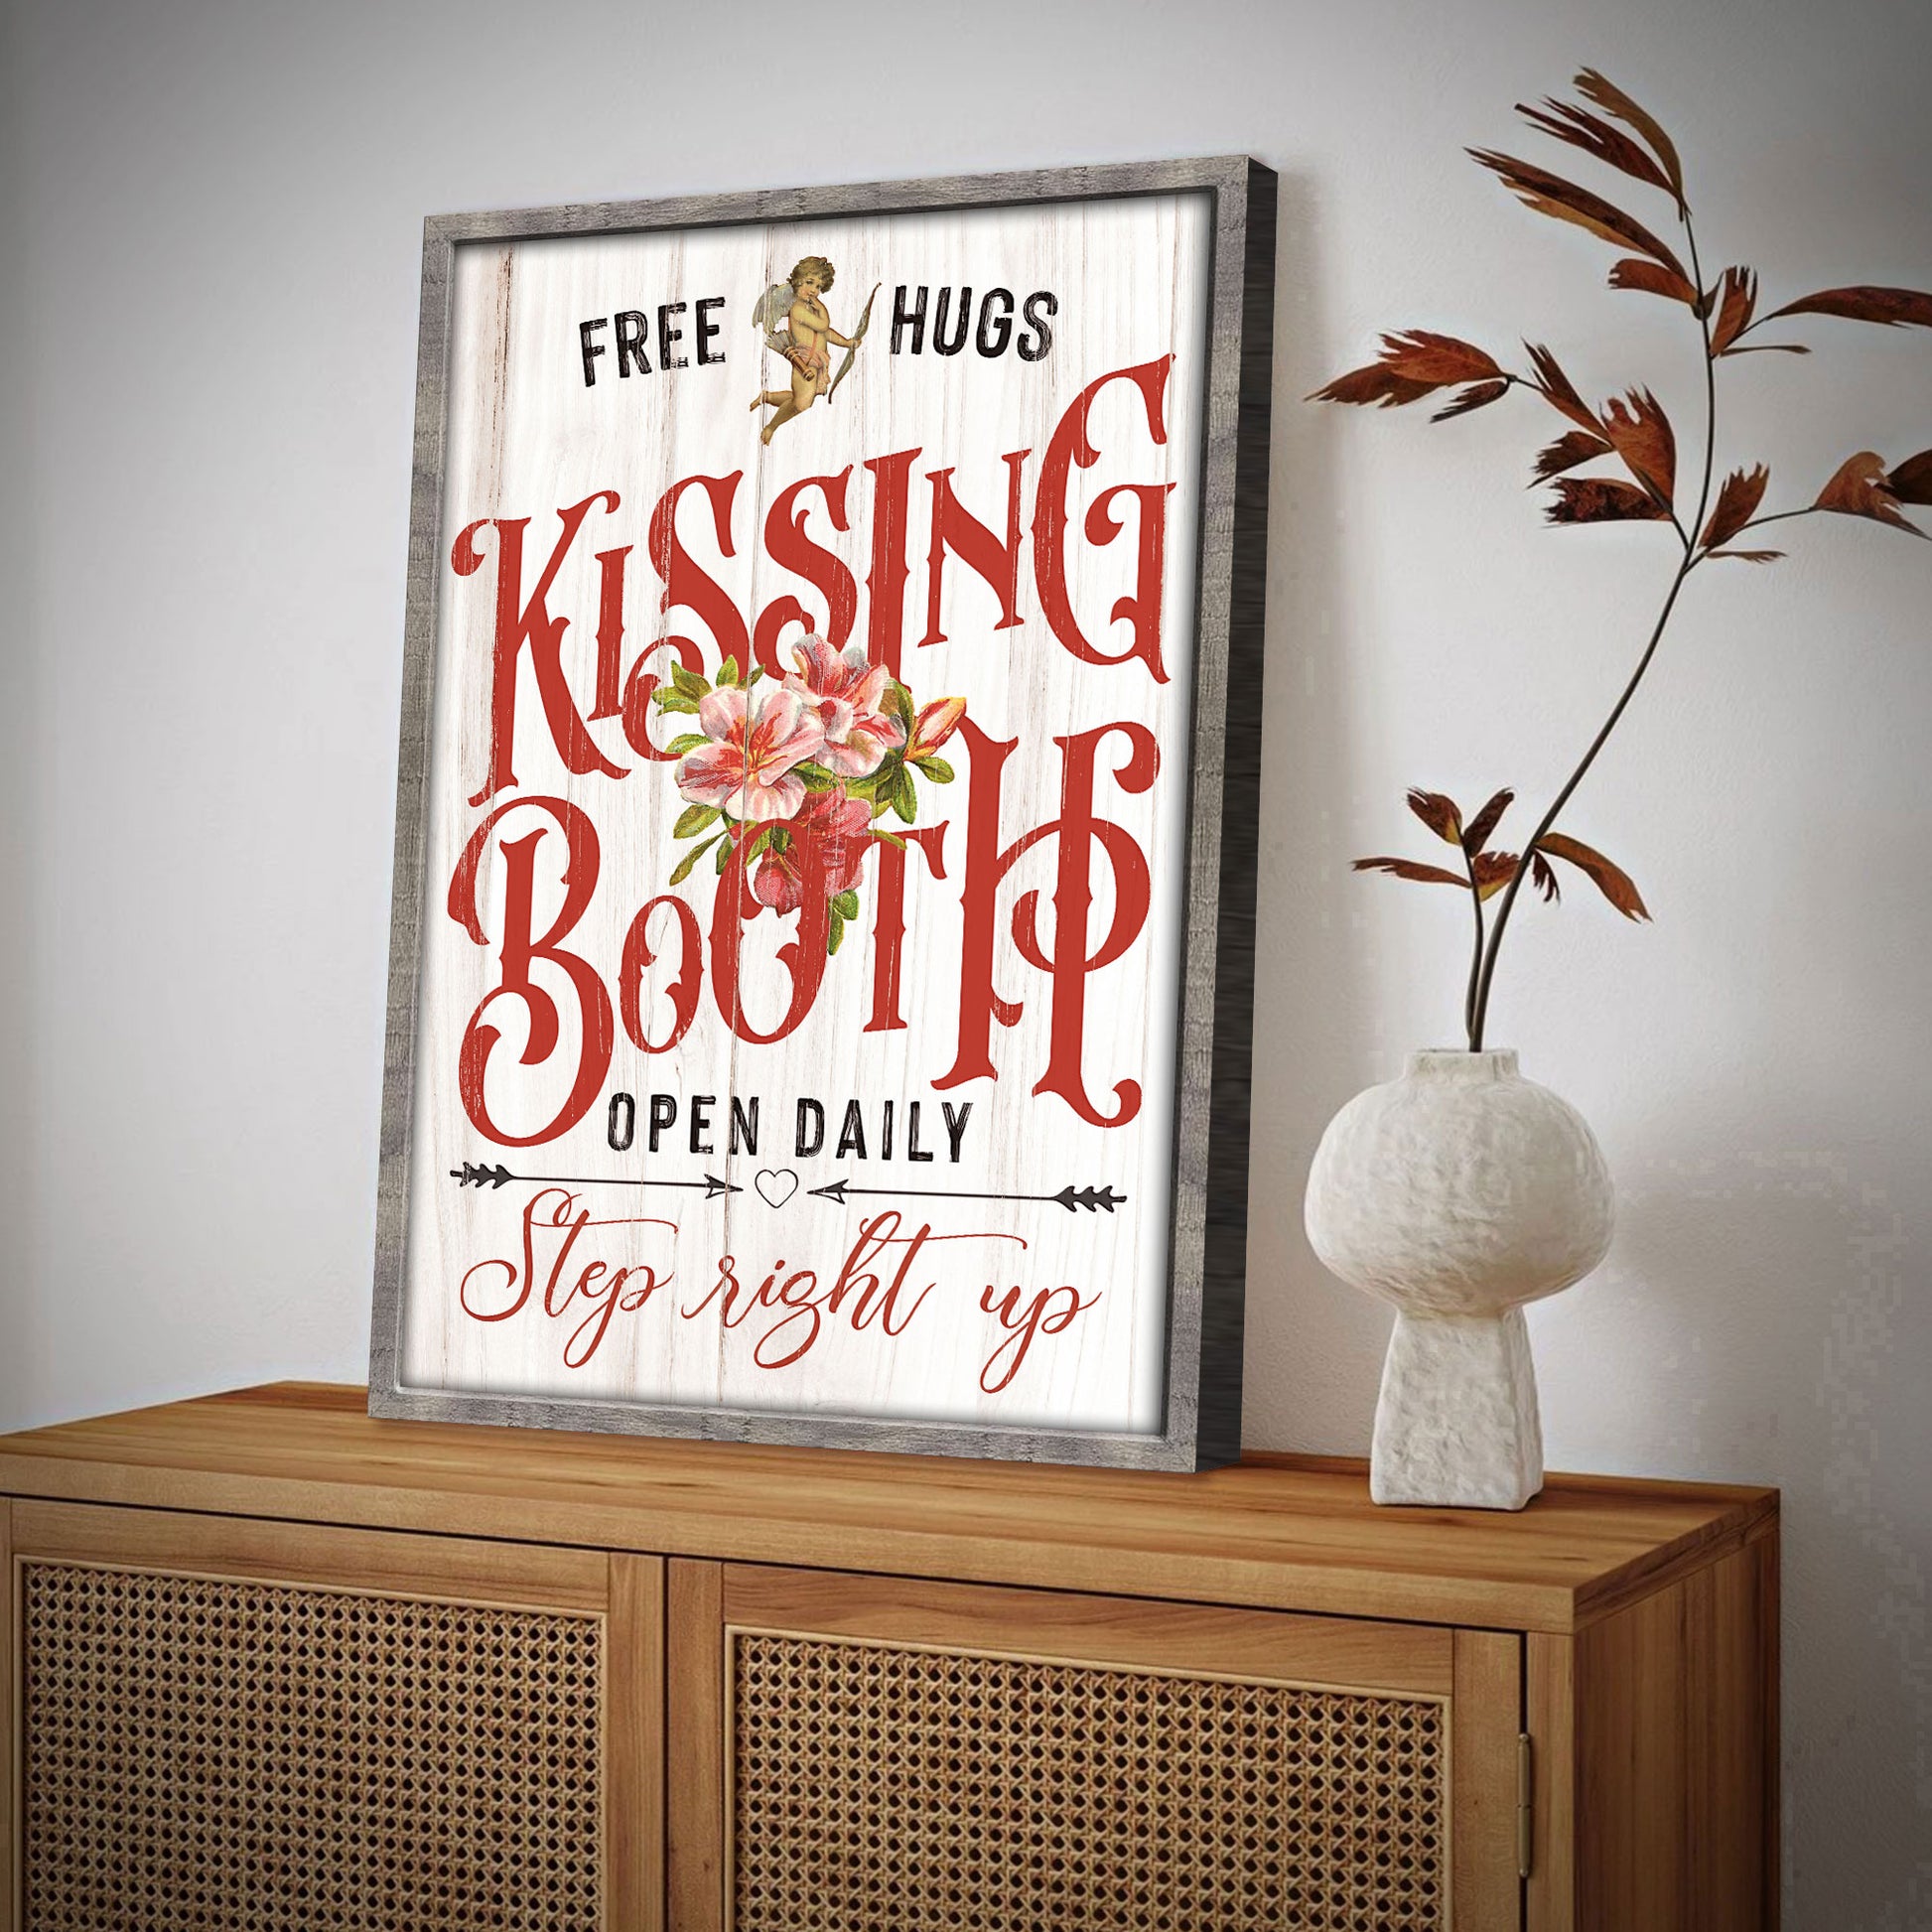 Valentines Day Kissing Booth Sign  - Image by Tailored Canvases